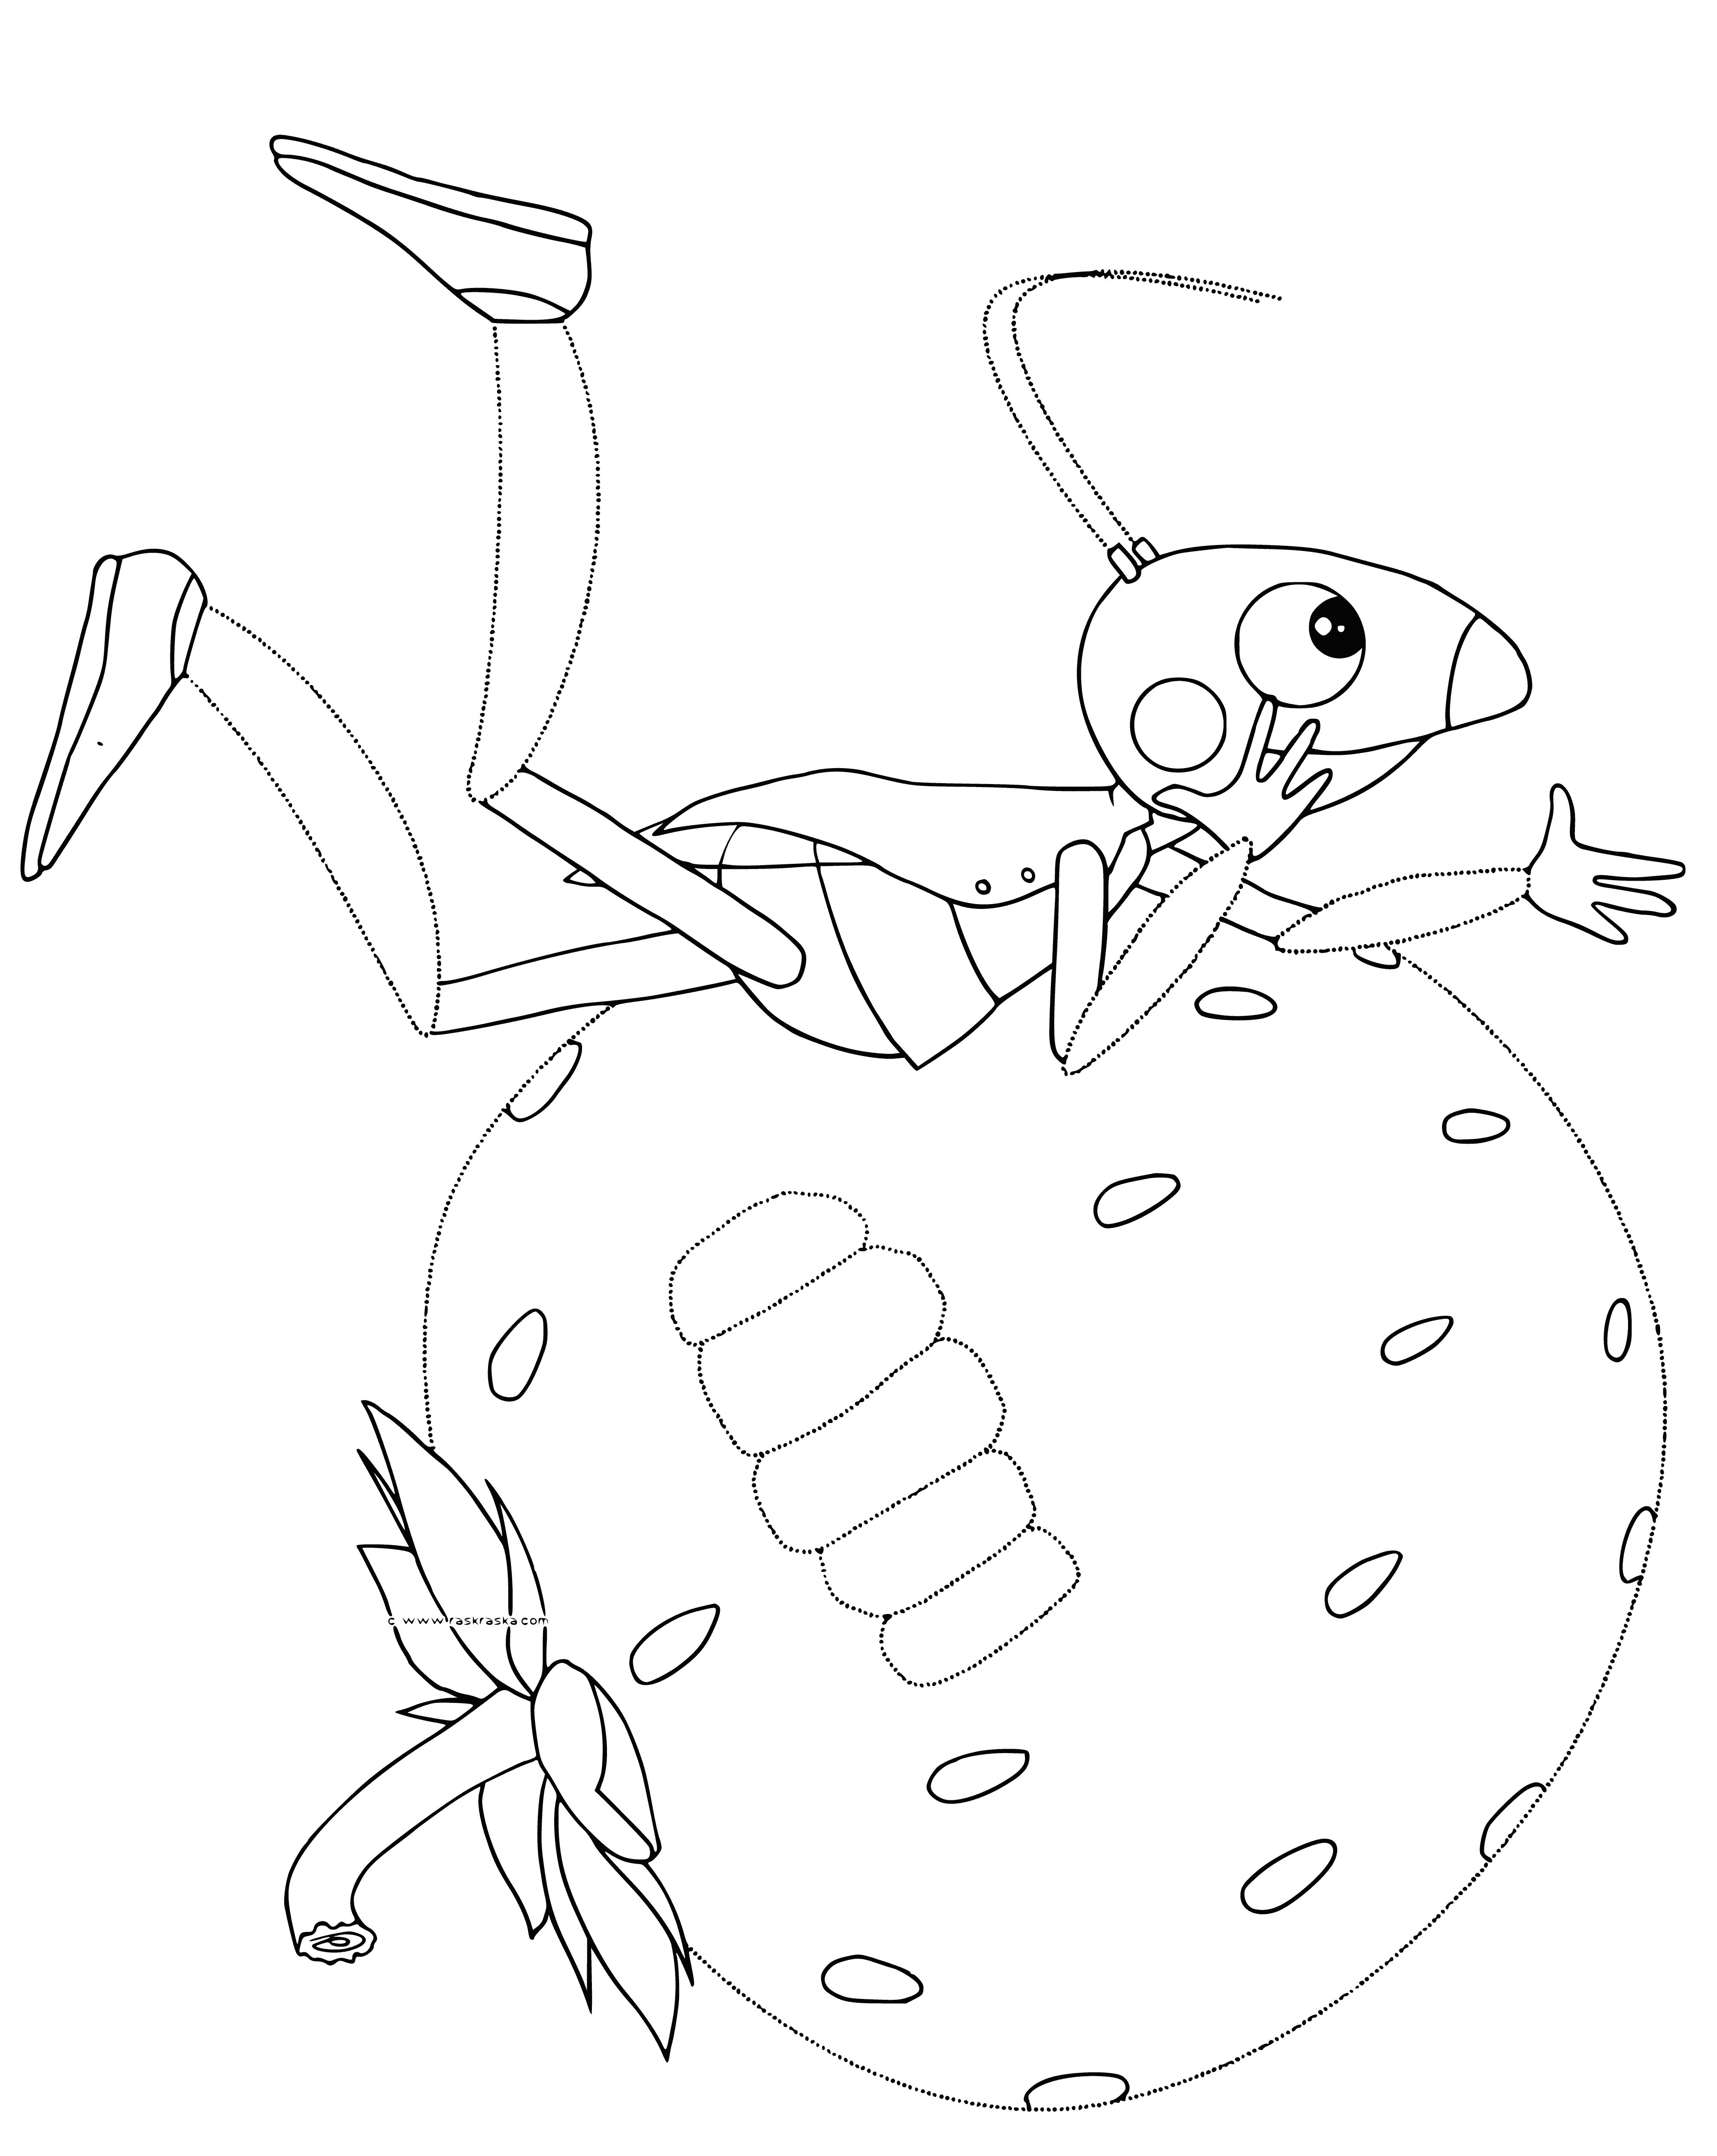 coloring page: Luntik & Kuzya have fun sitting together on a leaf. Luntik has big eyes & 4 arms/legs, Kuzya has small eyes/antennae & holds onto Luntik with front legs.